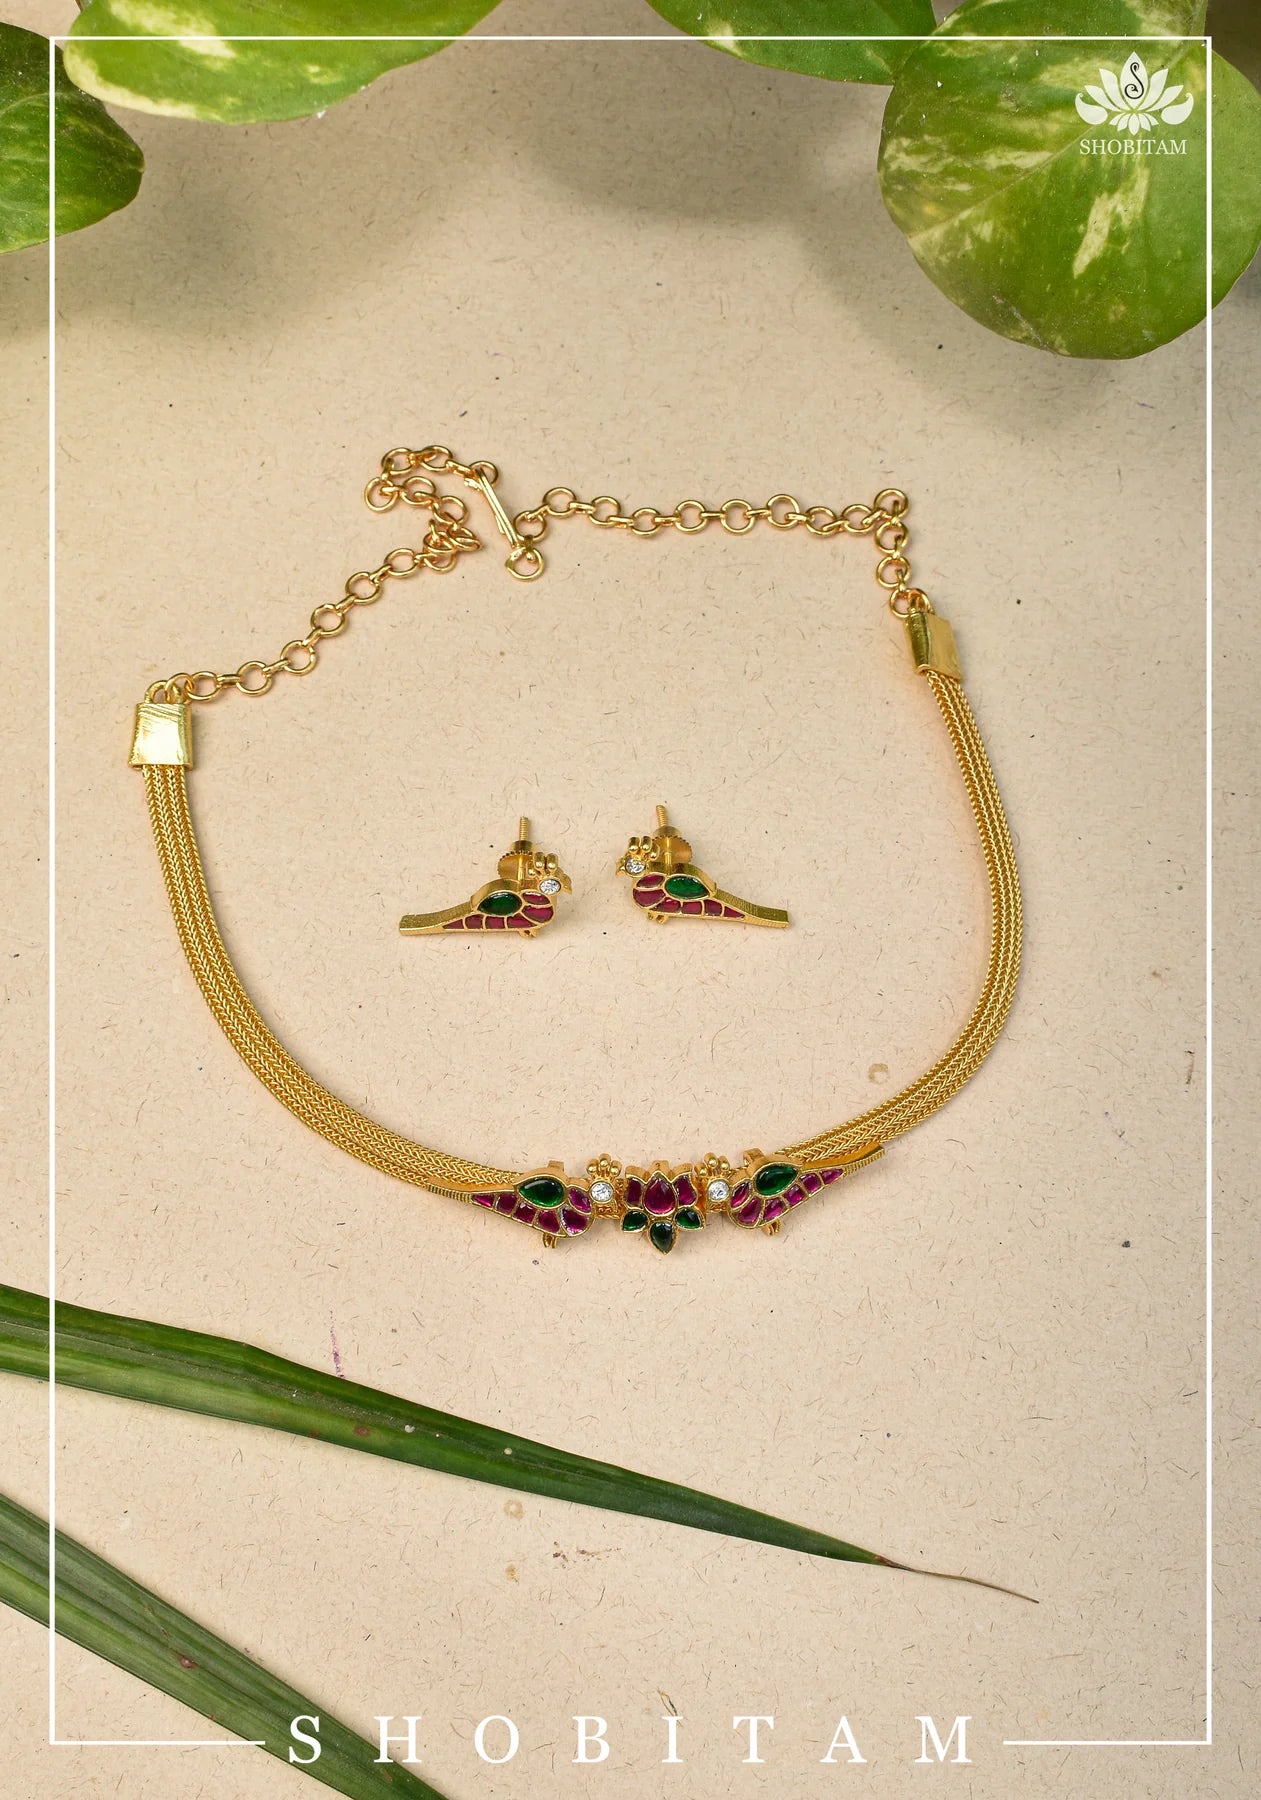 Twin Peacock and Lotus Minimalistic Ethnic Necklace and Earrings